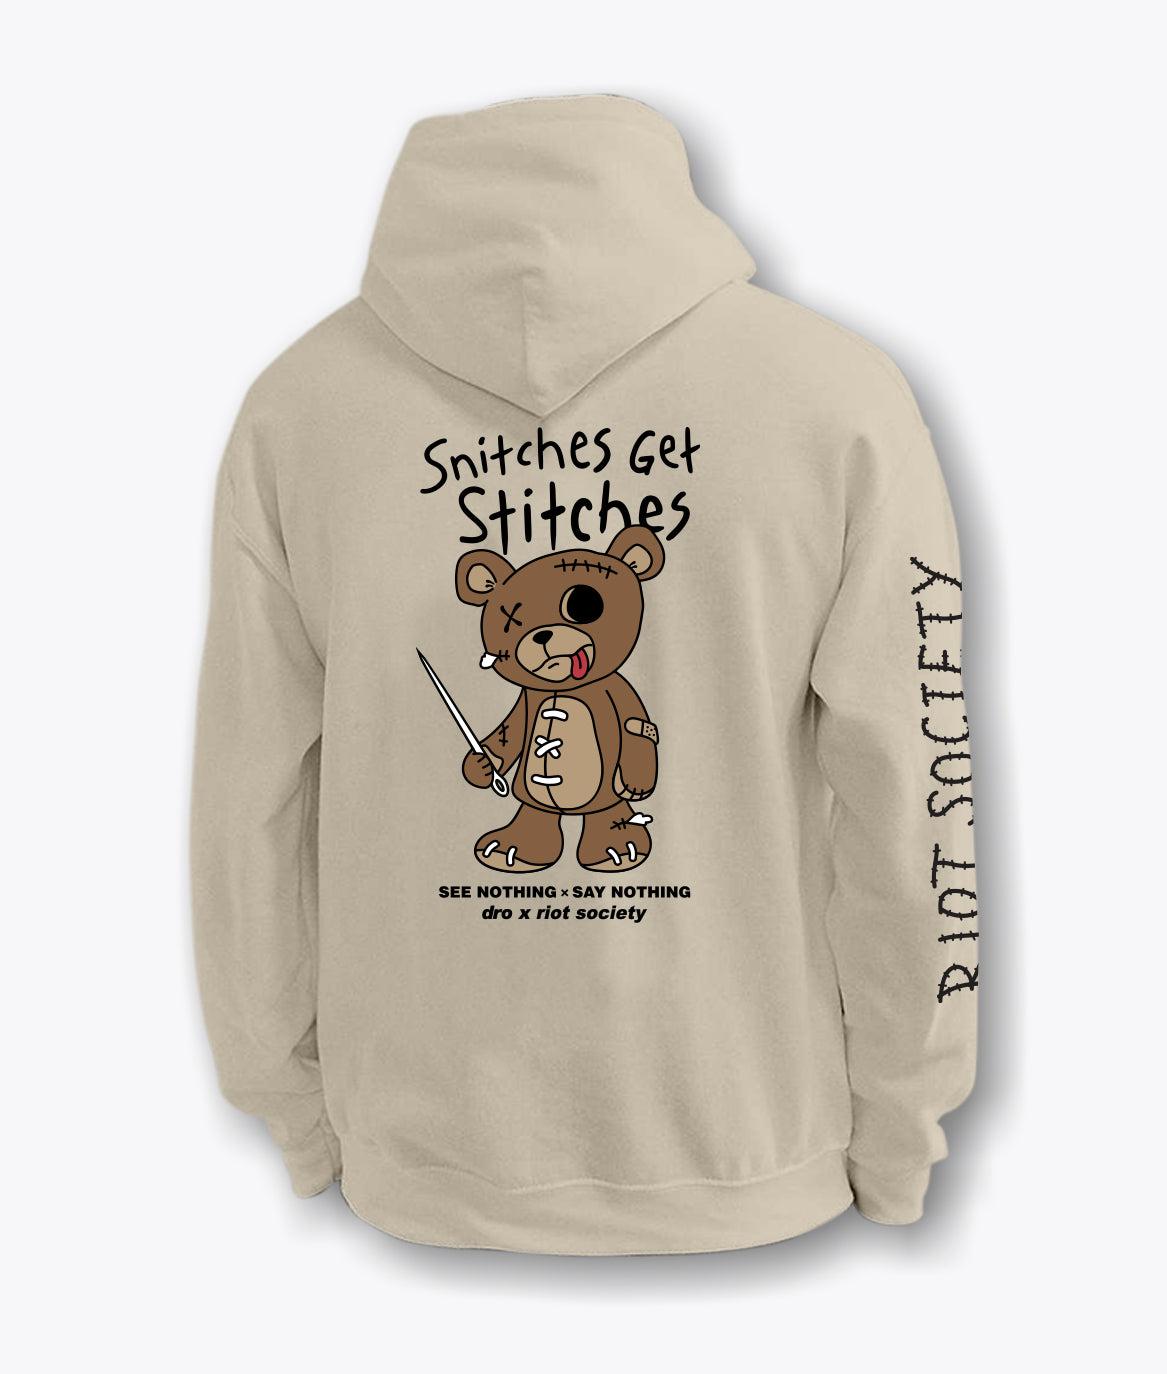 Dro x Riot Society Snitches Get Stitches Mens Hoodie - S - Riot Society